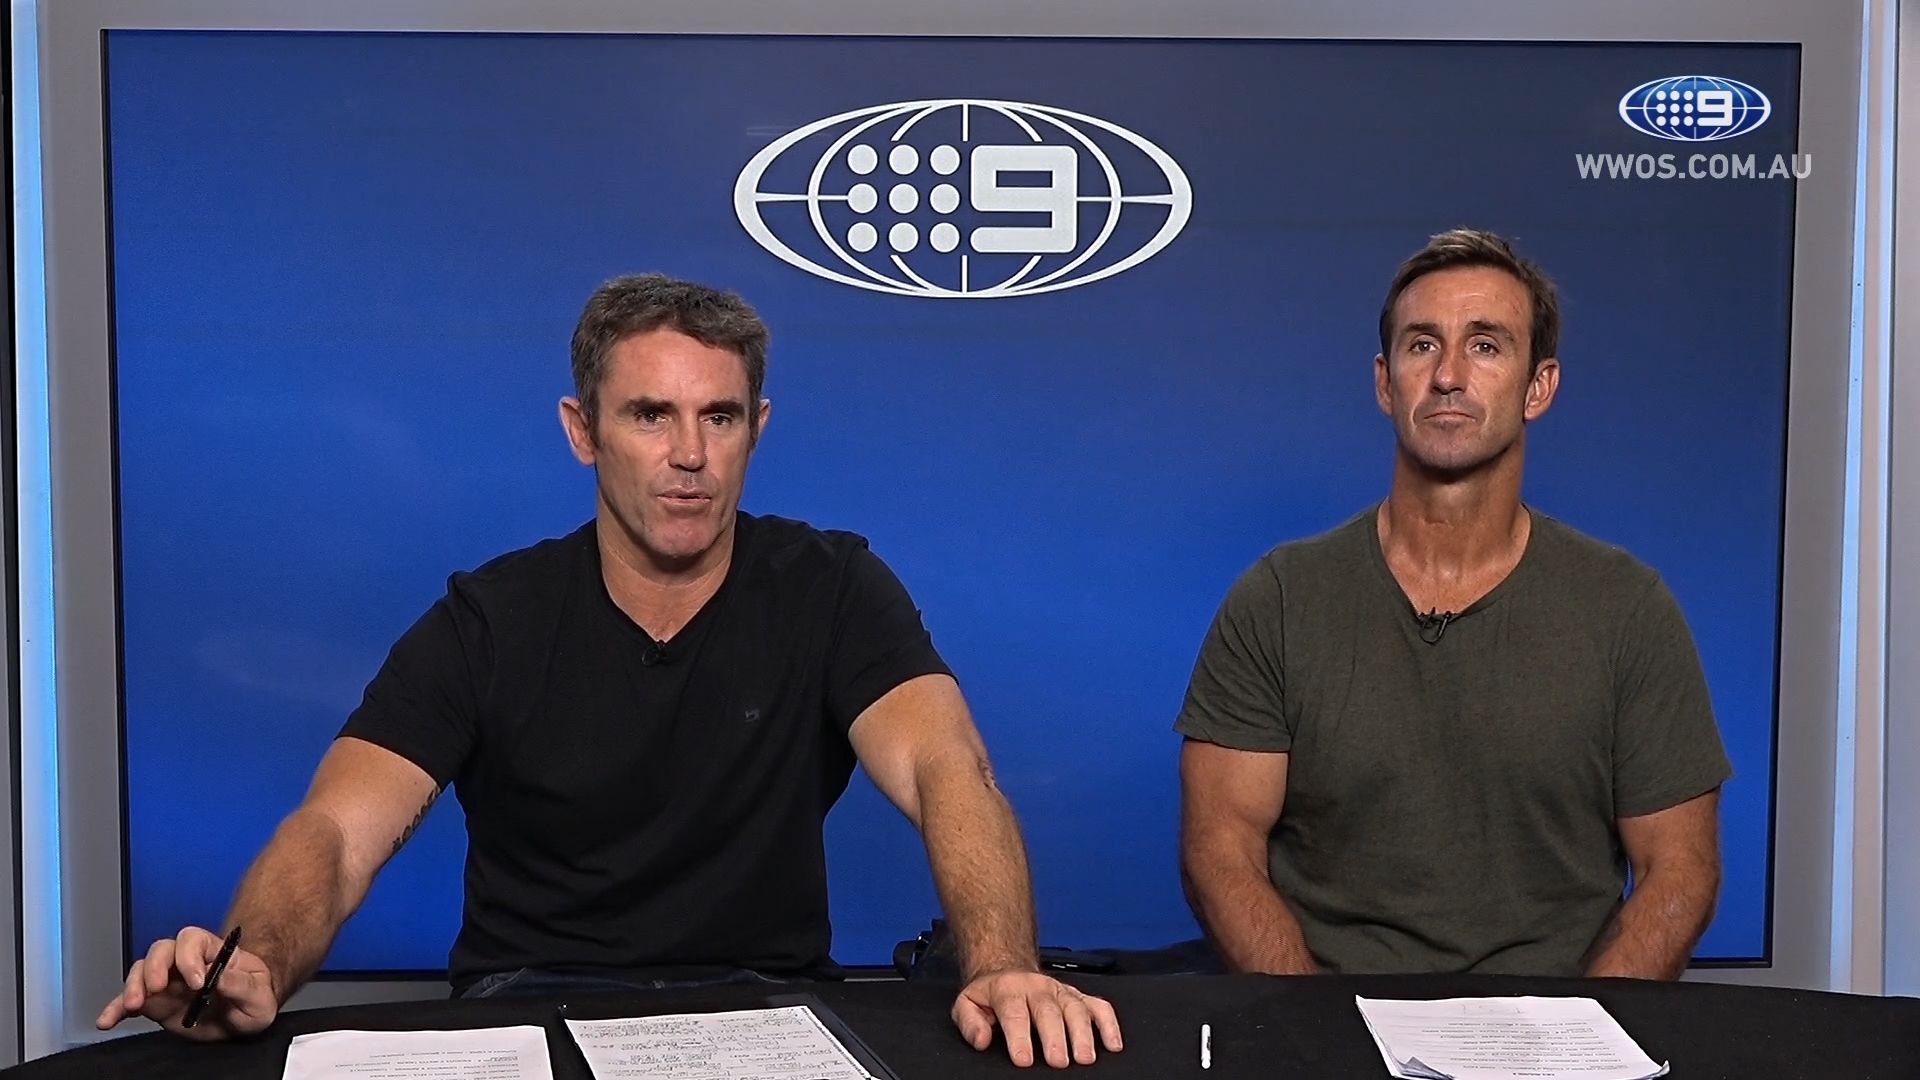 NRL Round 2 tips: Andrew Johns, Brad Fittler and Nine's experts give their predictions